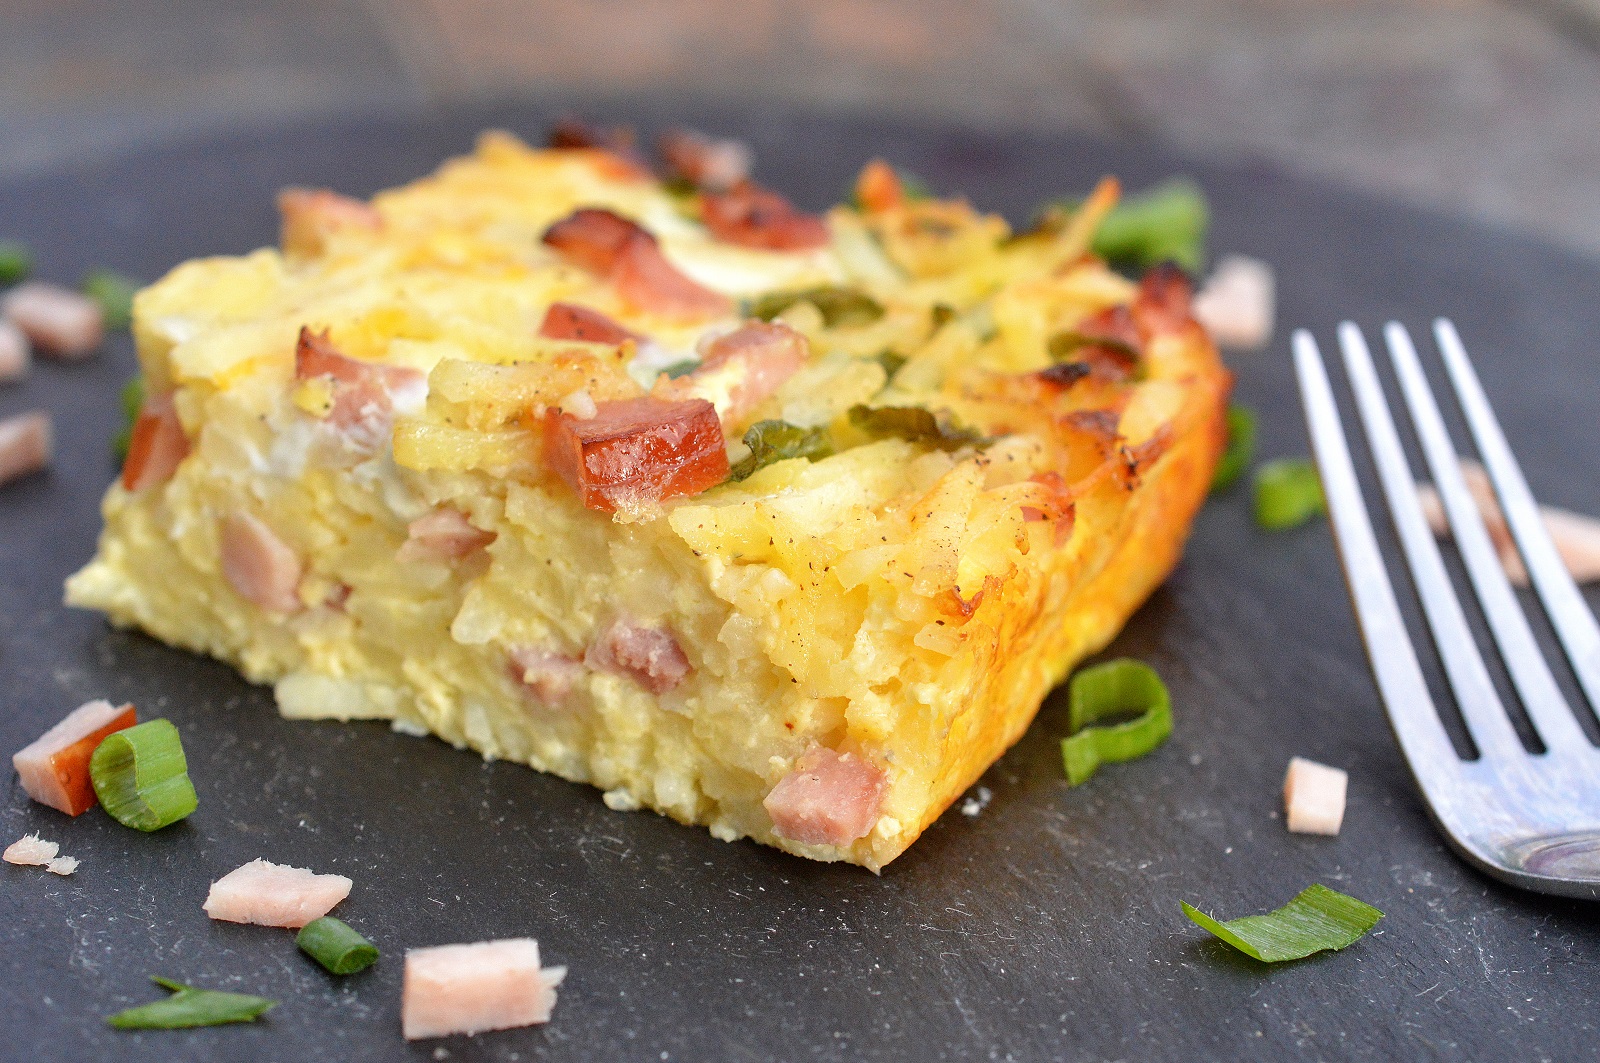 Use up your leftover ham and make this Ham & Cheese Hash Brown Bake